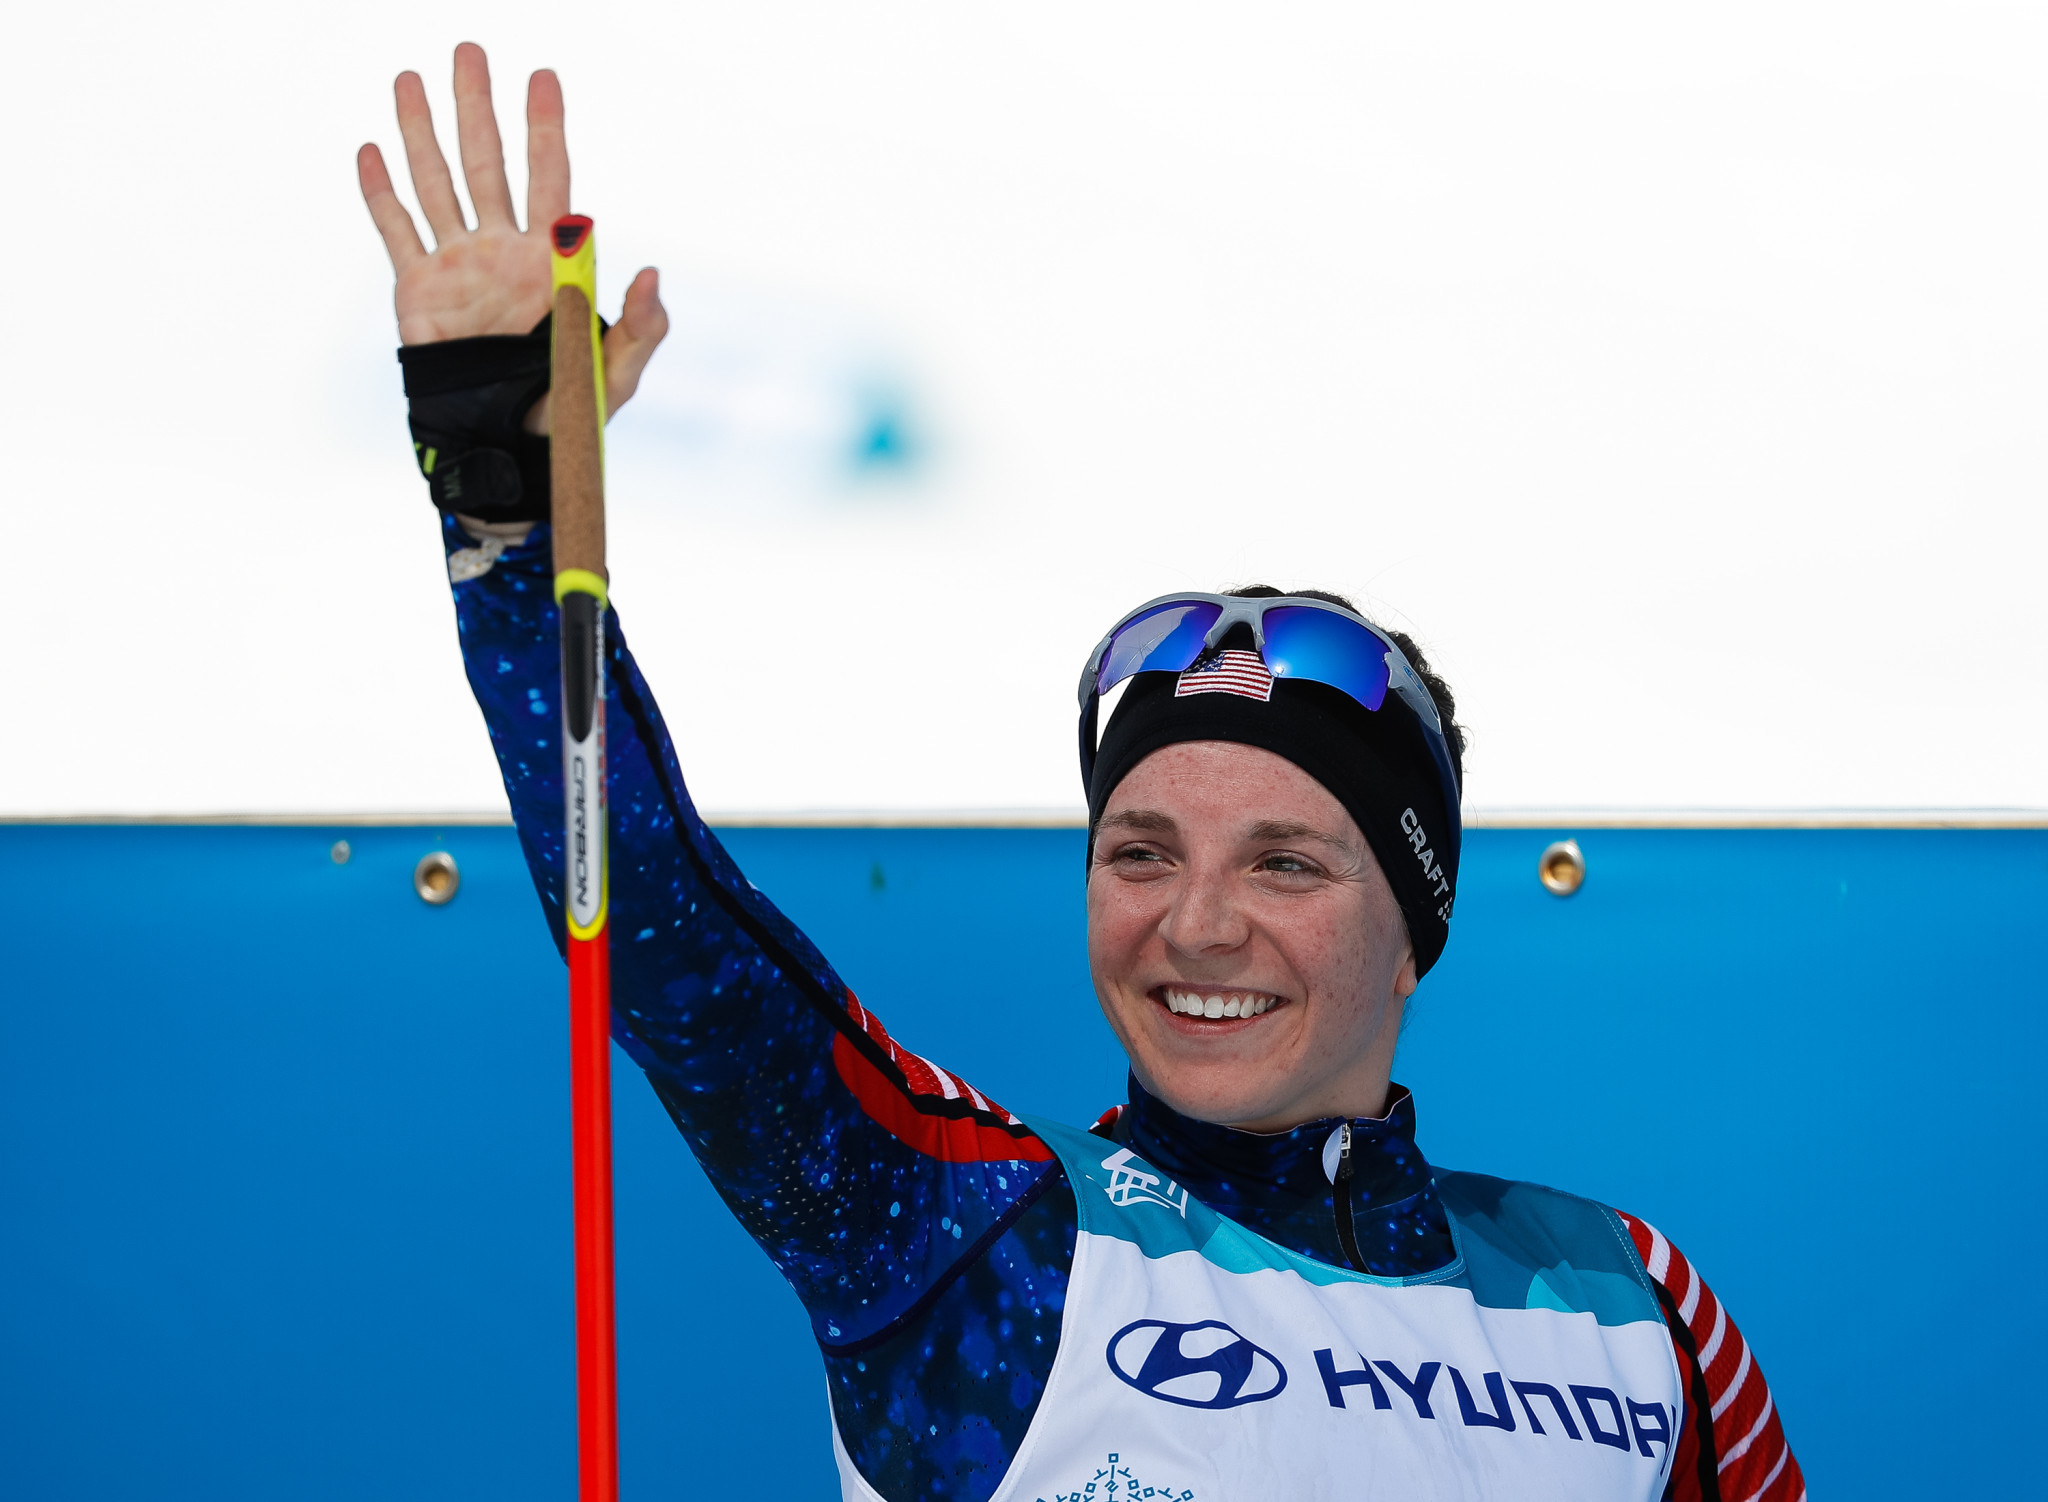 Kendall Gretsch was victorious in cross-country skiing at the World Para Snow Sports Championships ©Getty Images